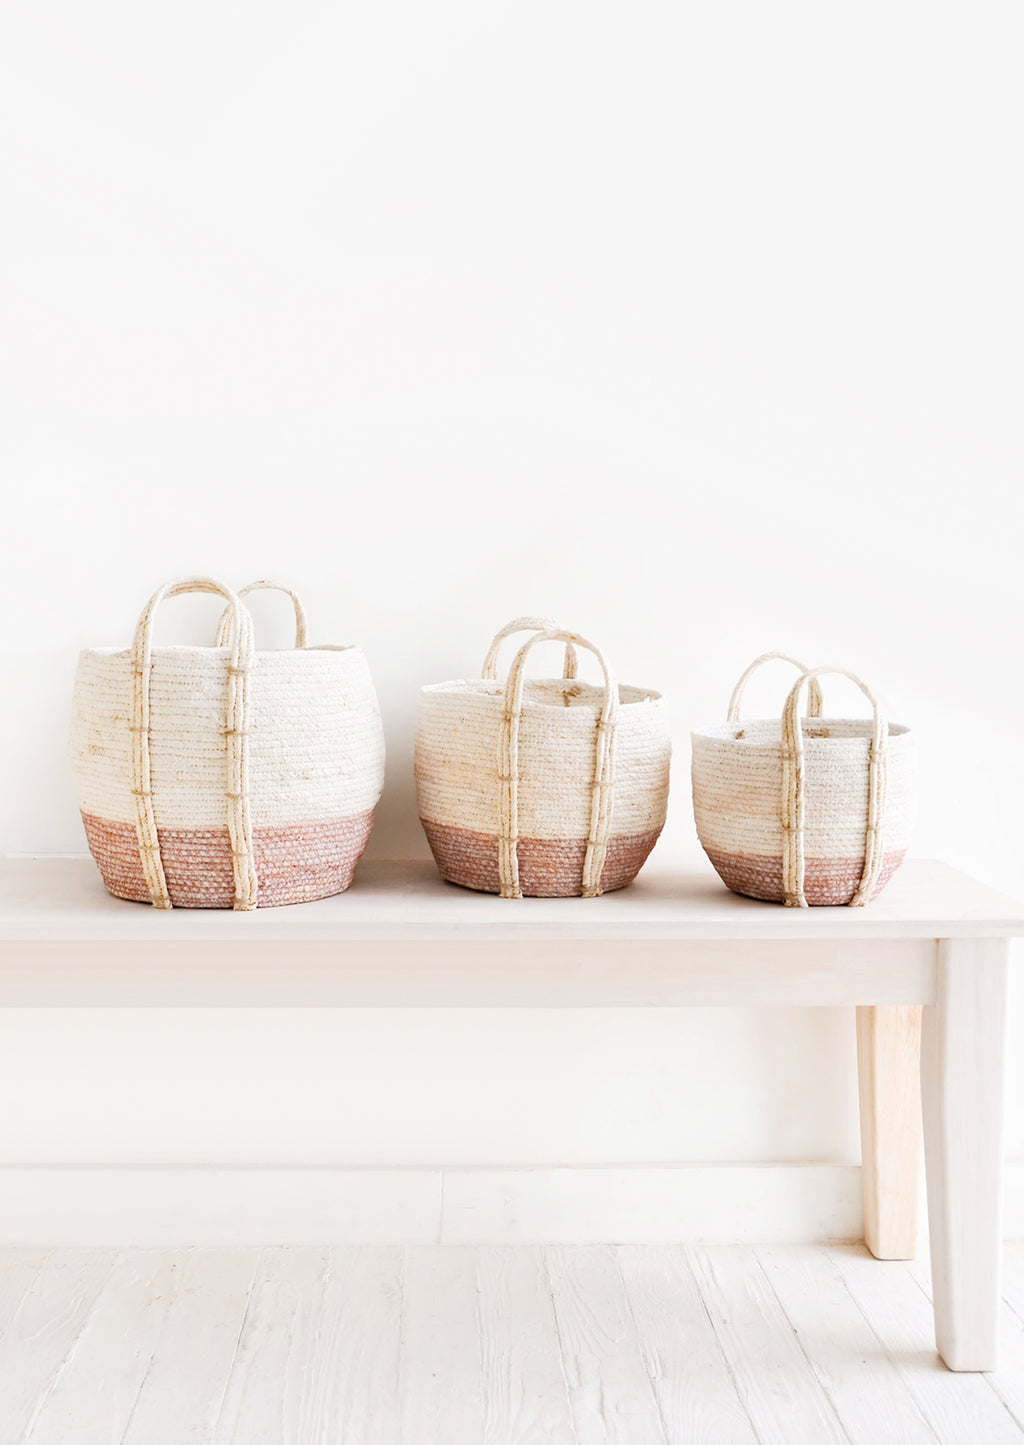 Dusty Rose / Low [Small]: Line up of three round storage baskets in incremental sizes, handles attached at sides, band of contrasting pink color along bottom.